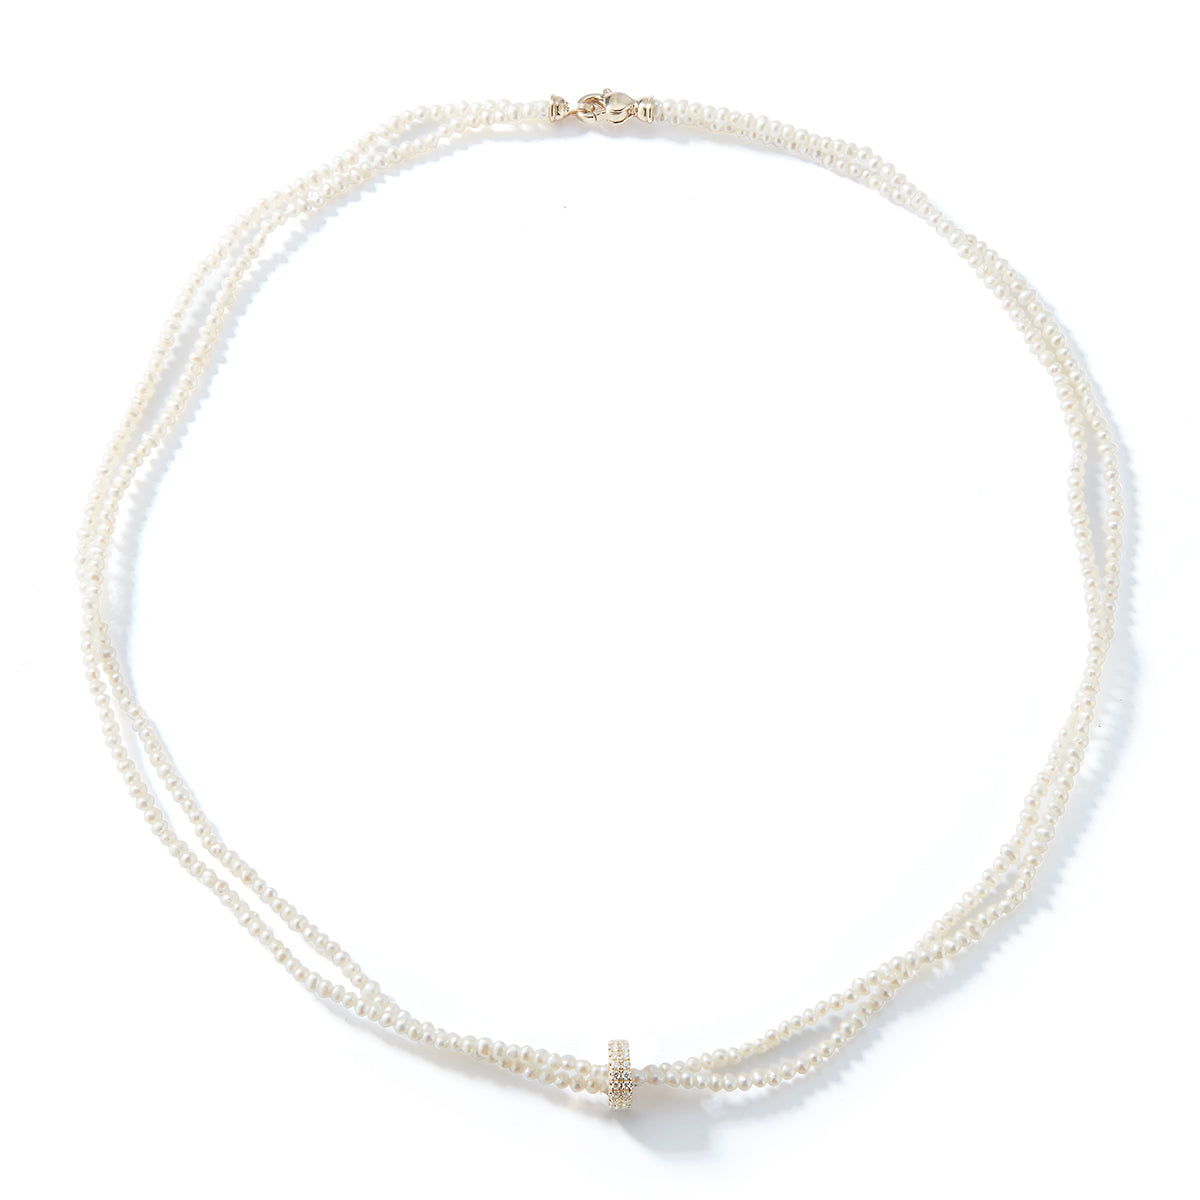 Two-Strand “Dancing Pearls” Necklace with Diamond Slider